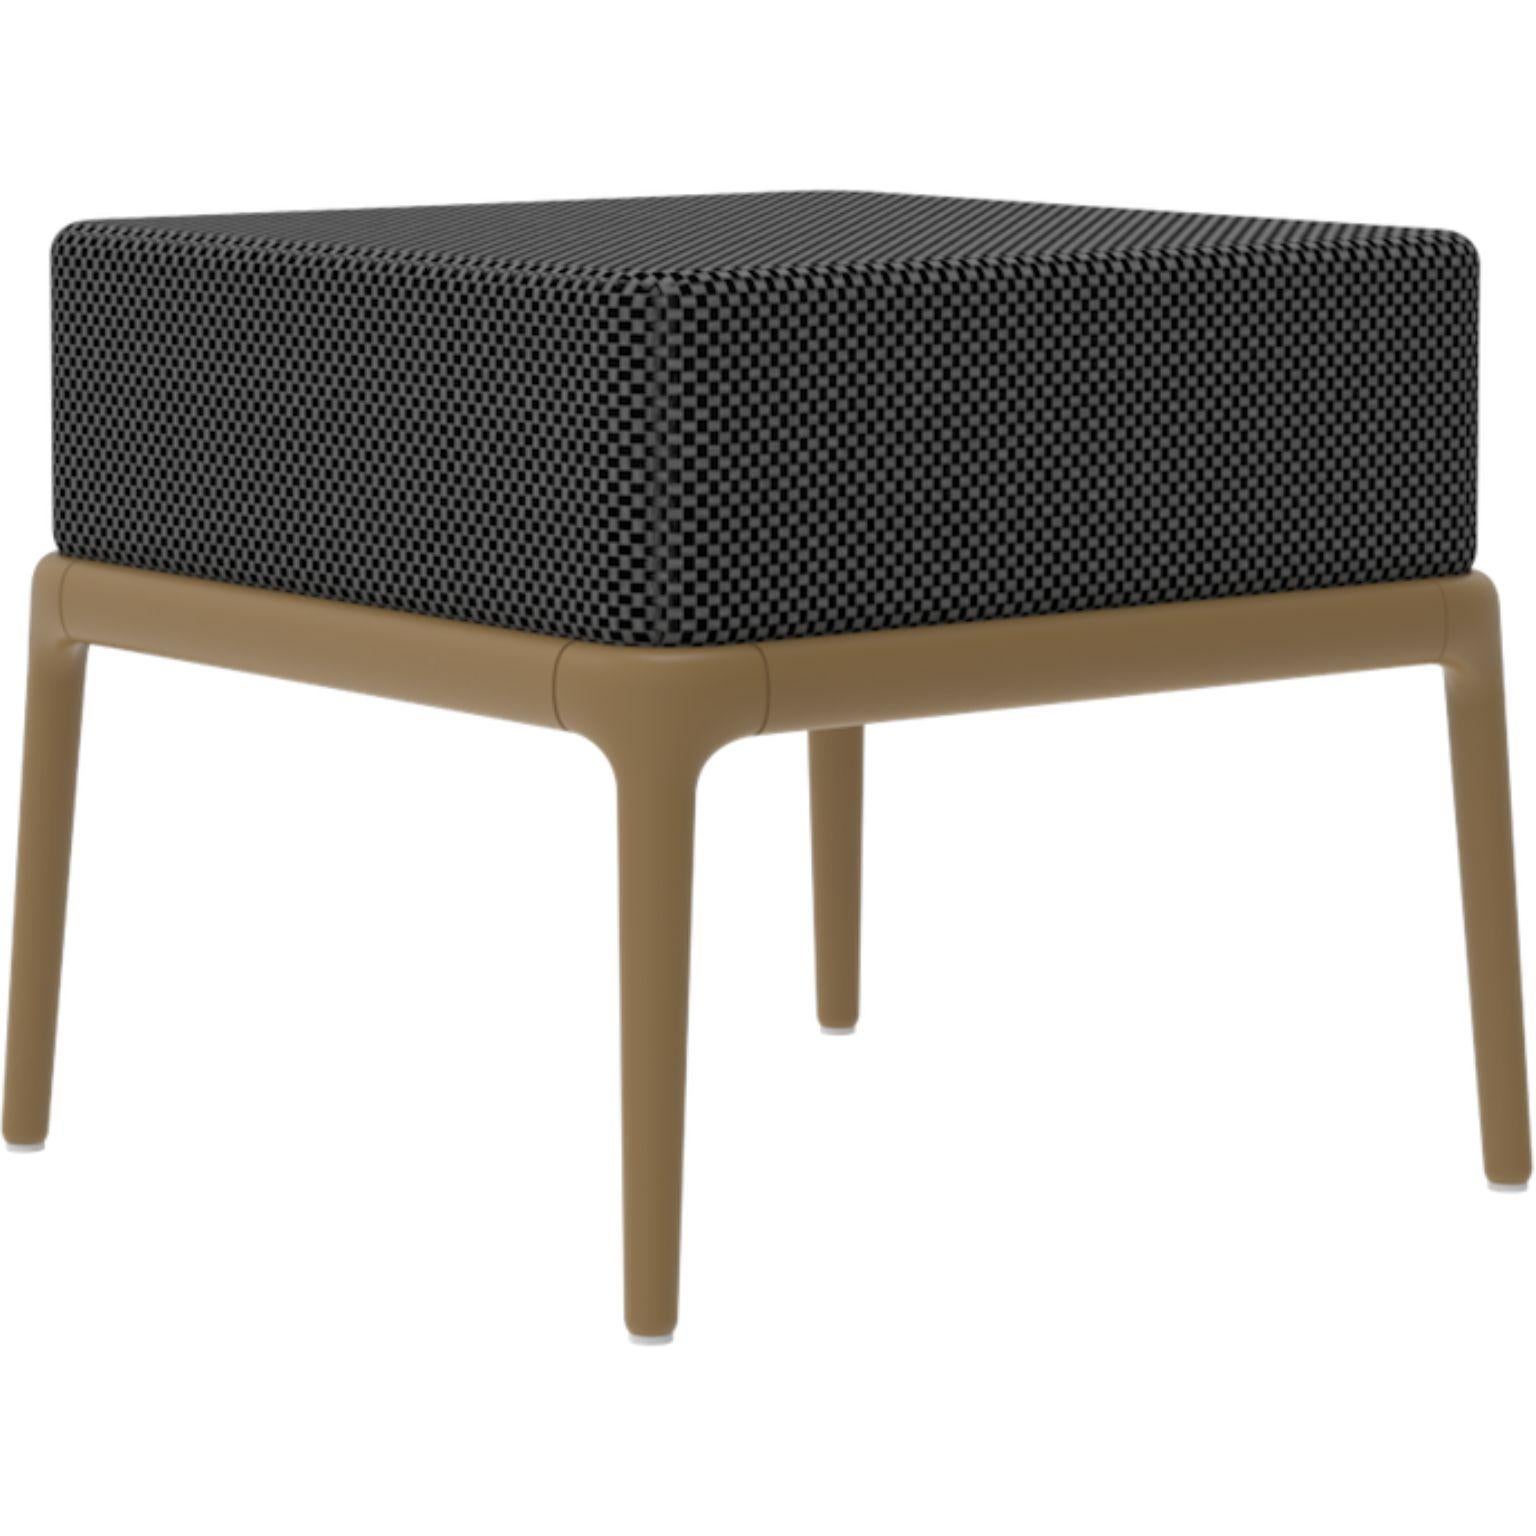 Xaloc gold pouf 50 by Mowee.
Dimensions: D50 x W50 x H43 cm
Material: Aluminium, Textile
Weight: 7 kg
Also Available in different colours and finishes. 

 Xaloc synthesizes the lines of interior furniture to extrapolate to the exterior,